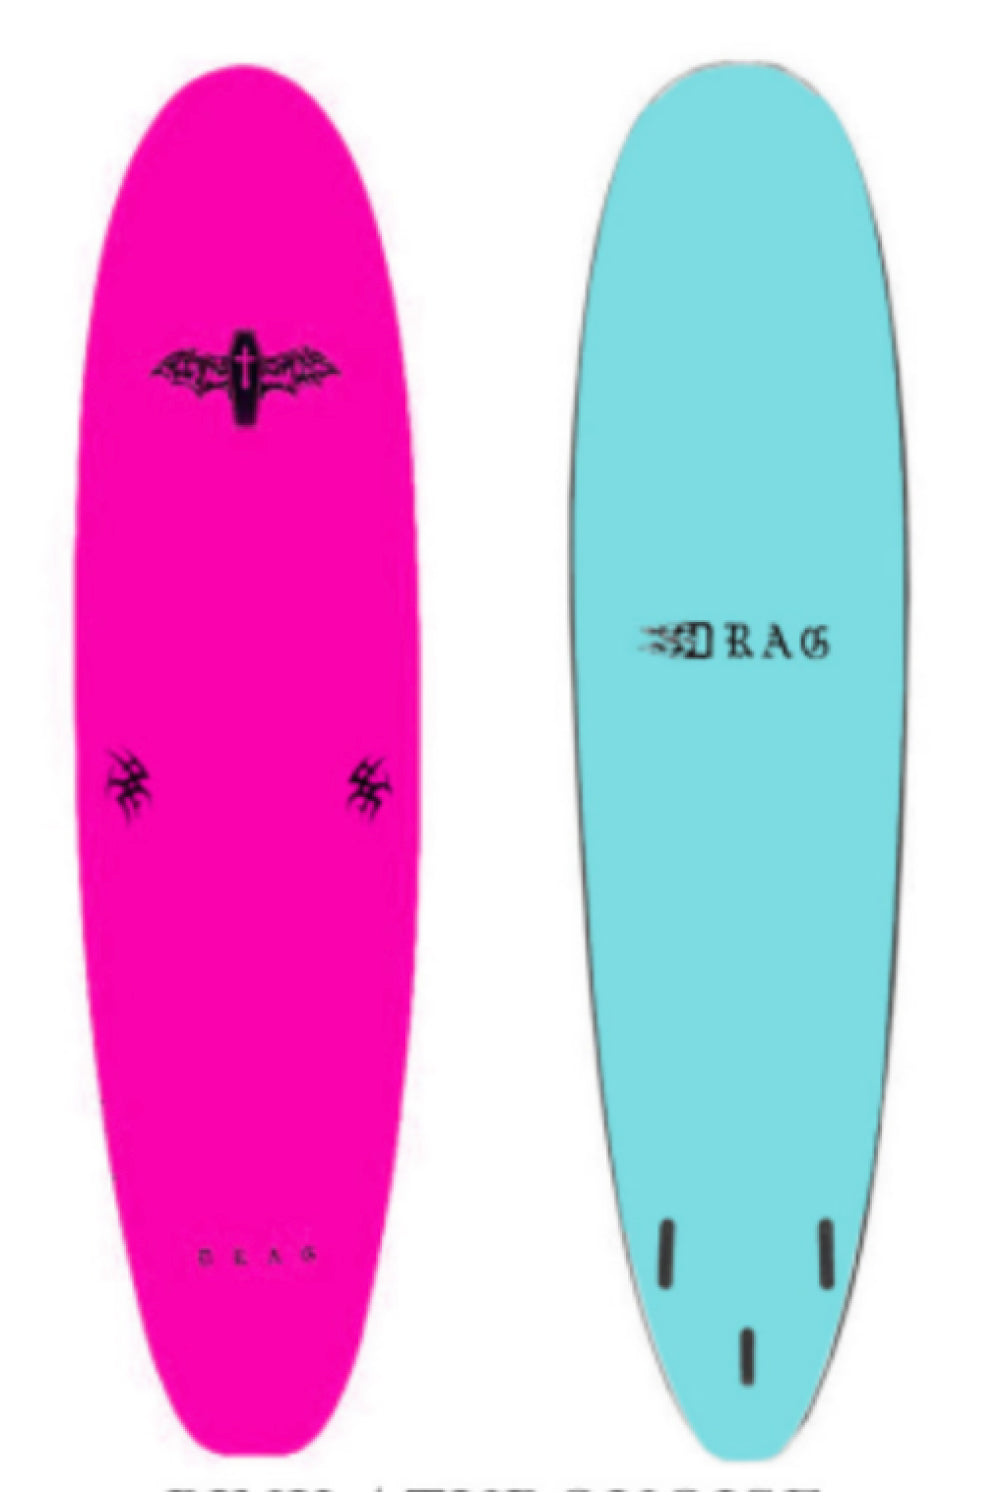 Drag Coffin 8’0 Thruster Softboard - Comes with fins